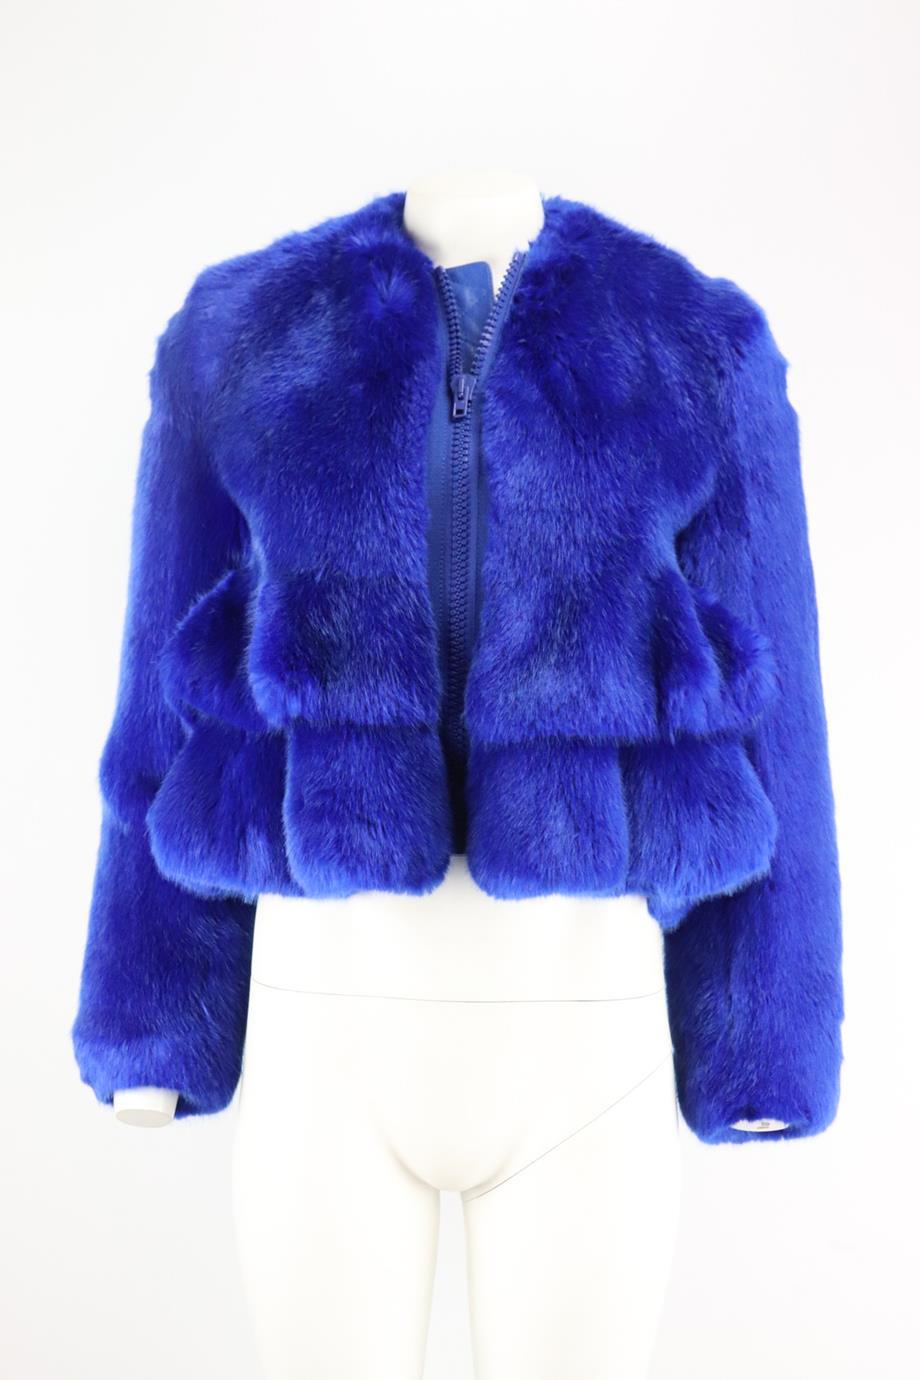 Givenchy faux fur peplum jacket. Blue. Long sleeve, crewneck. Zip fastening at front. 70% Acrylic, 18% modacrylic, 12% polyester; lining: 100% polyester; zip finishings: 100% leather; grosgrain: 60% cotton, 40% acetate; filling material: 60%